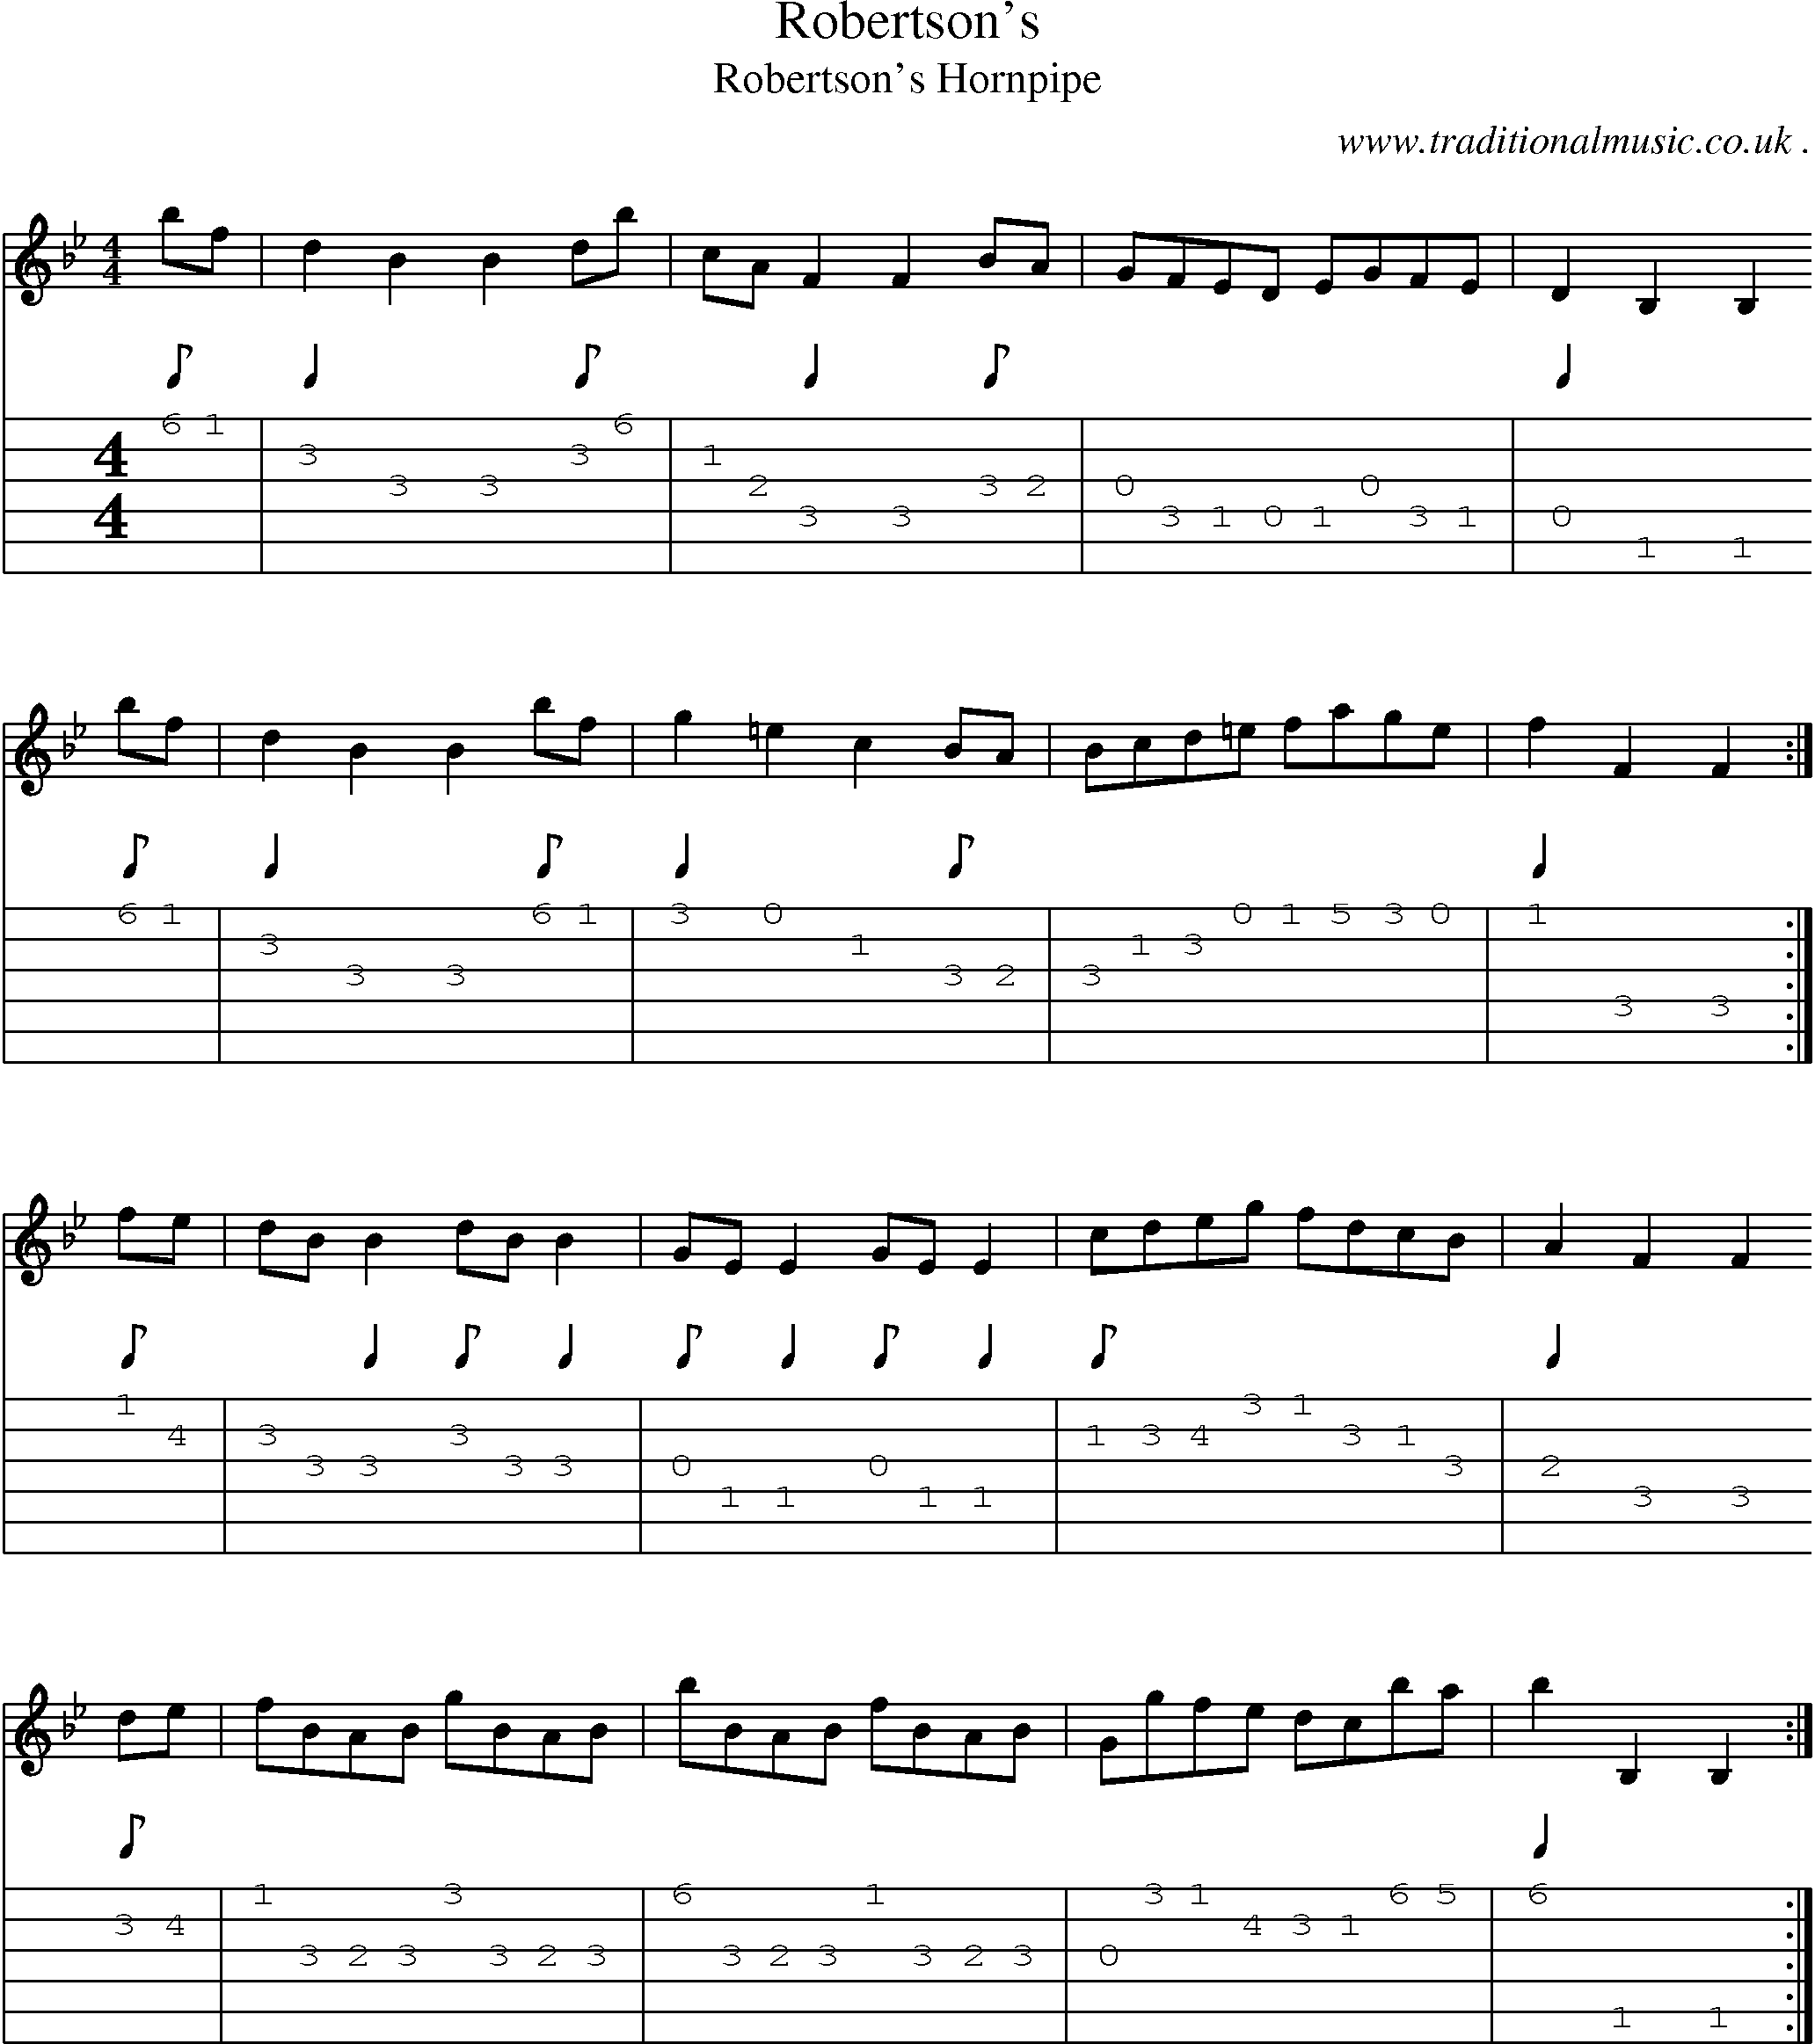 Sheet-music  score, Chords and Guitar Tabs for Robertsons